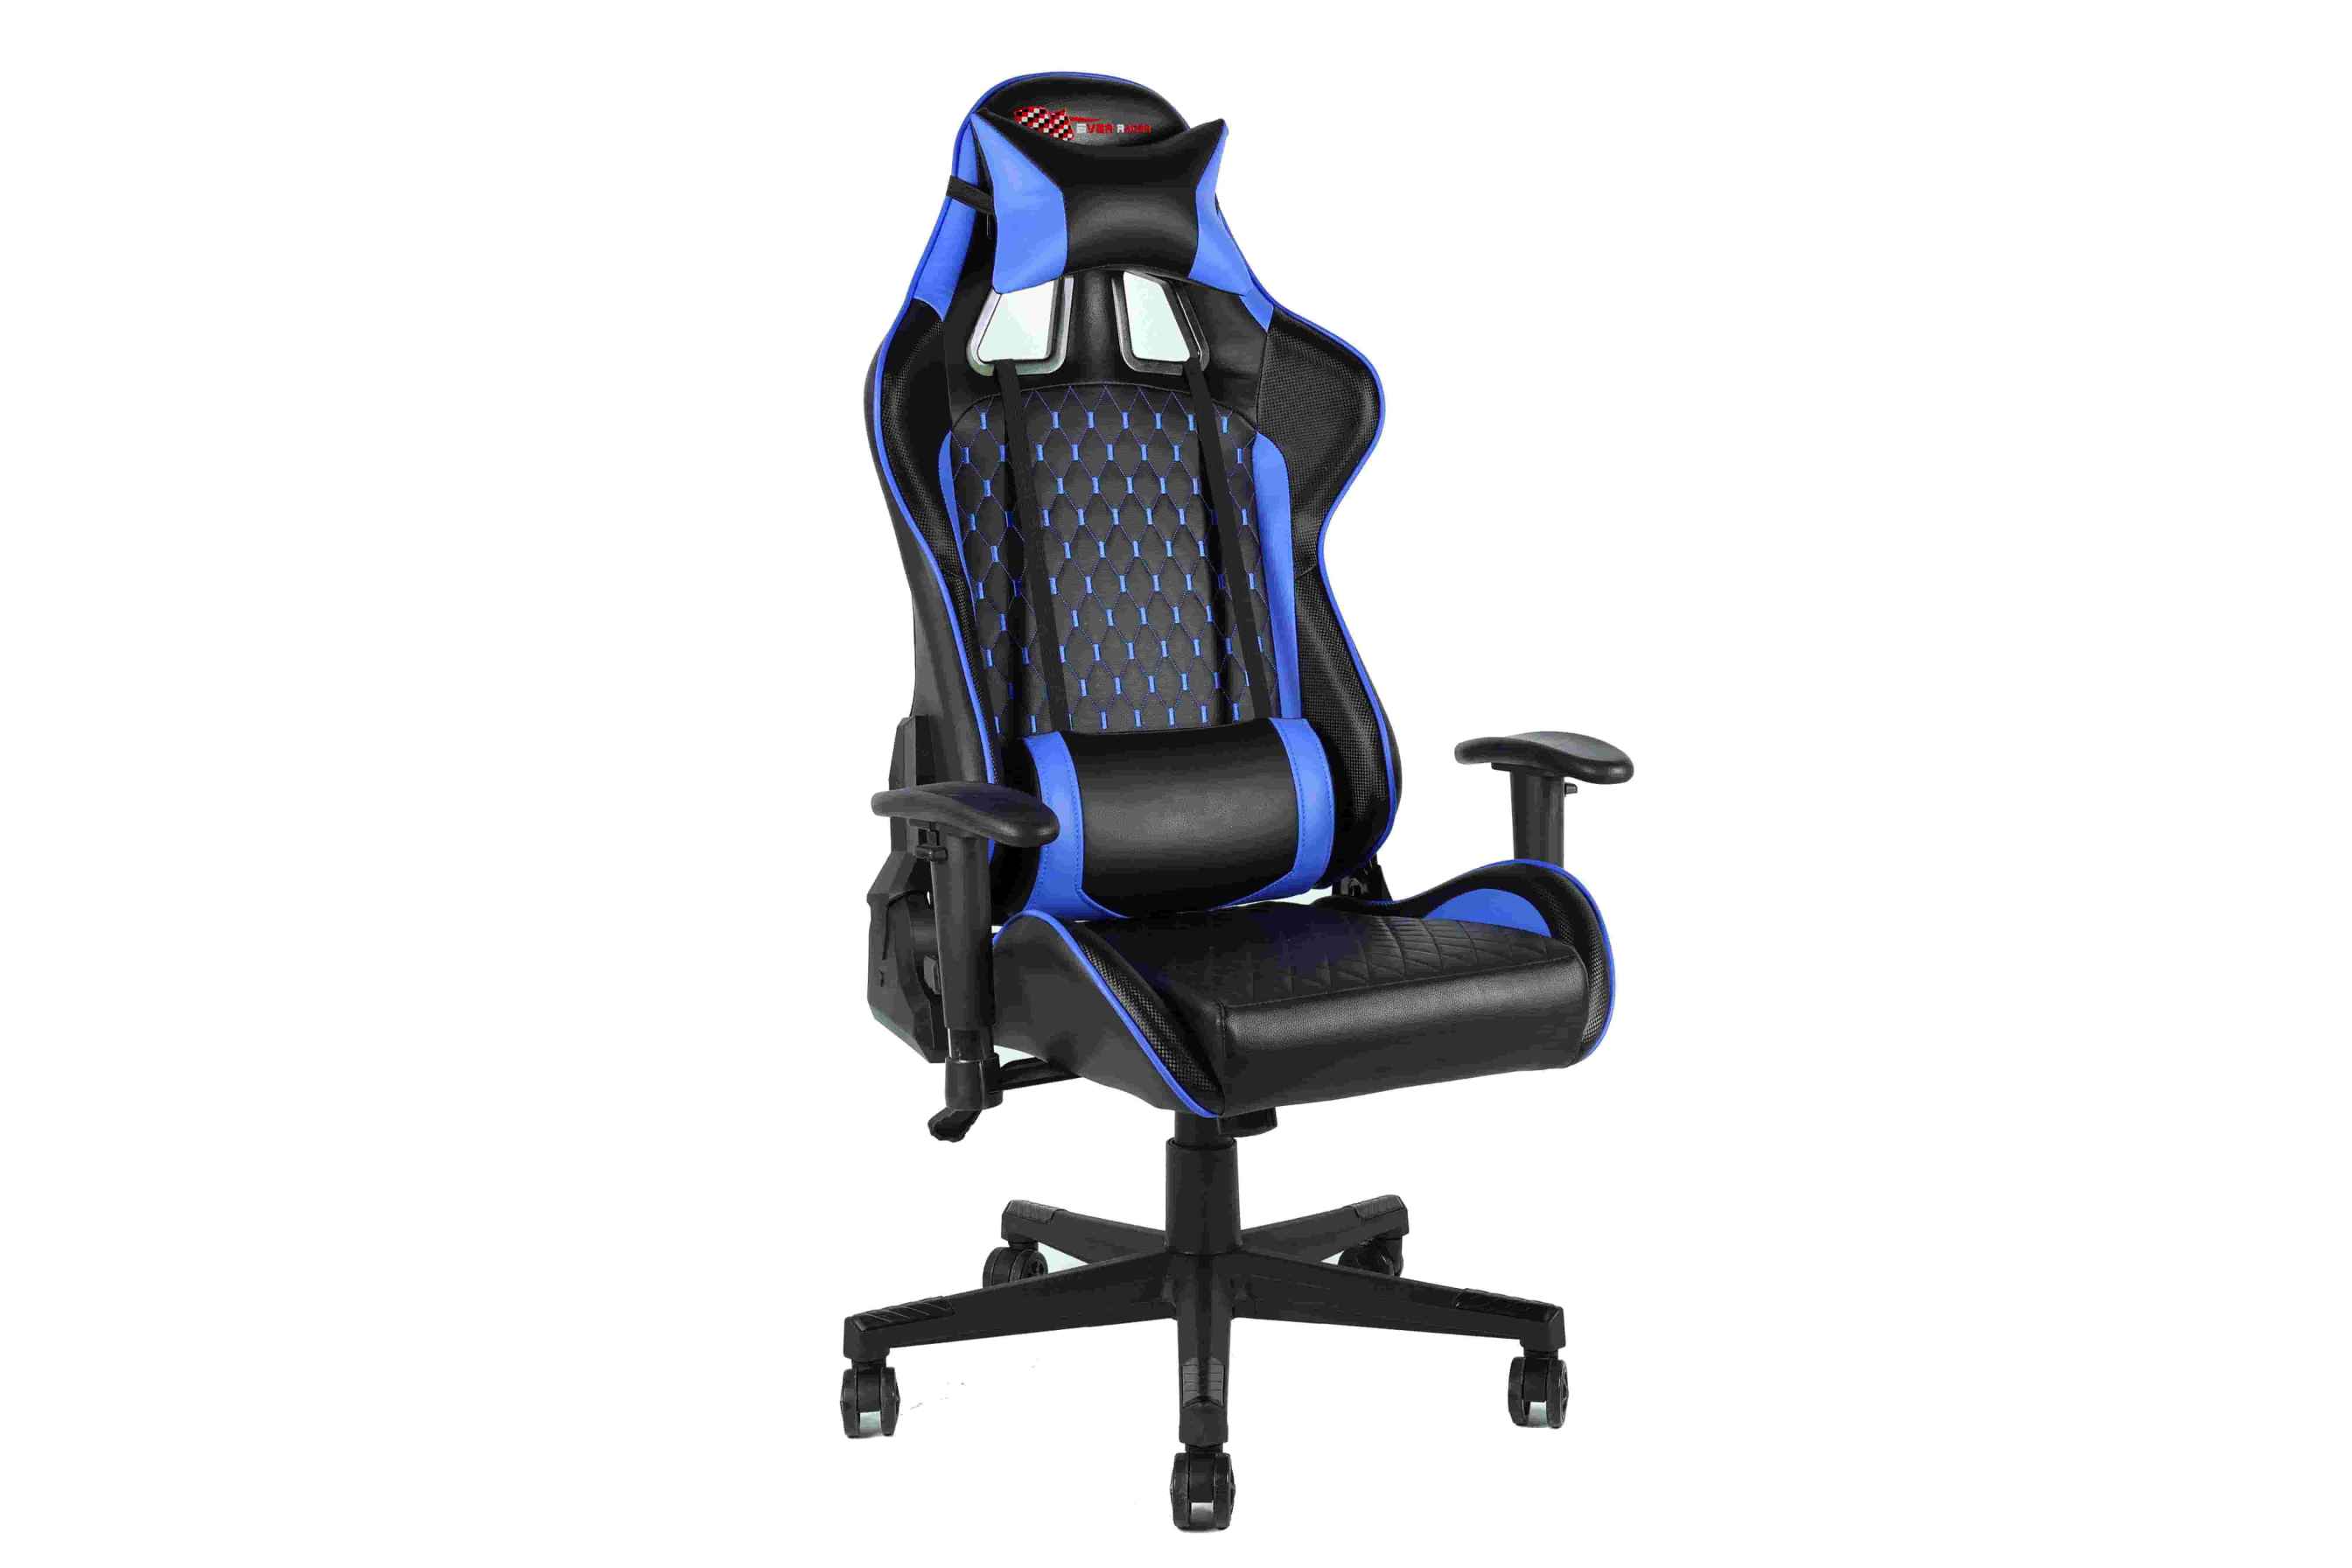 New EverRacer Gaming Office Chair PU Leather Black & Blue